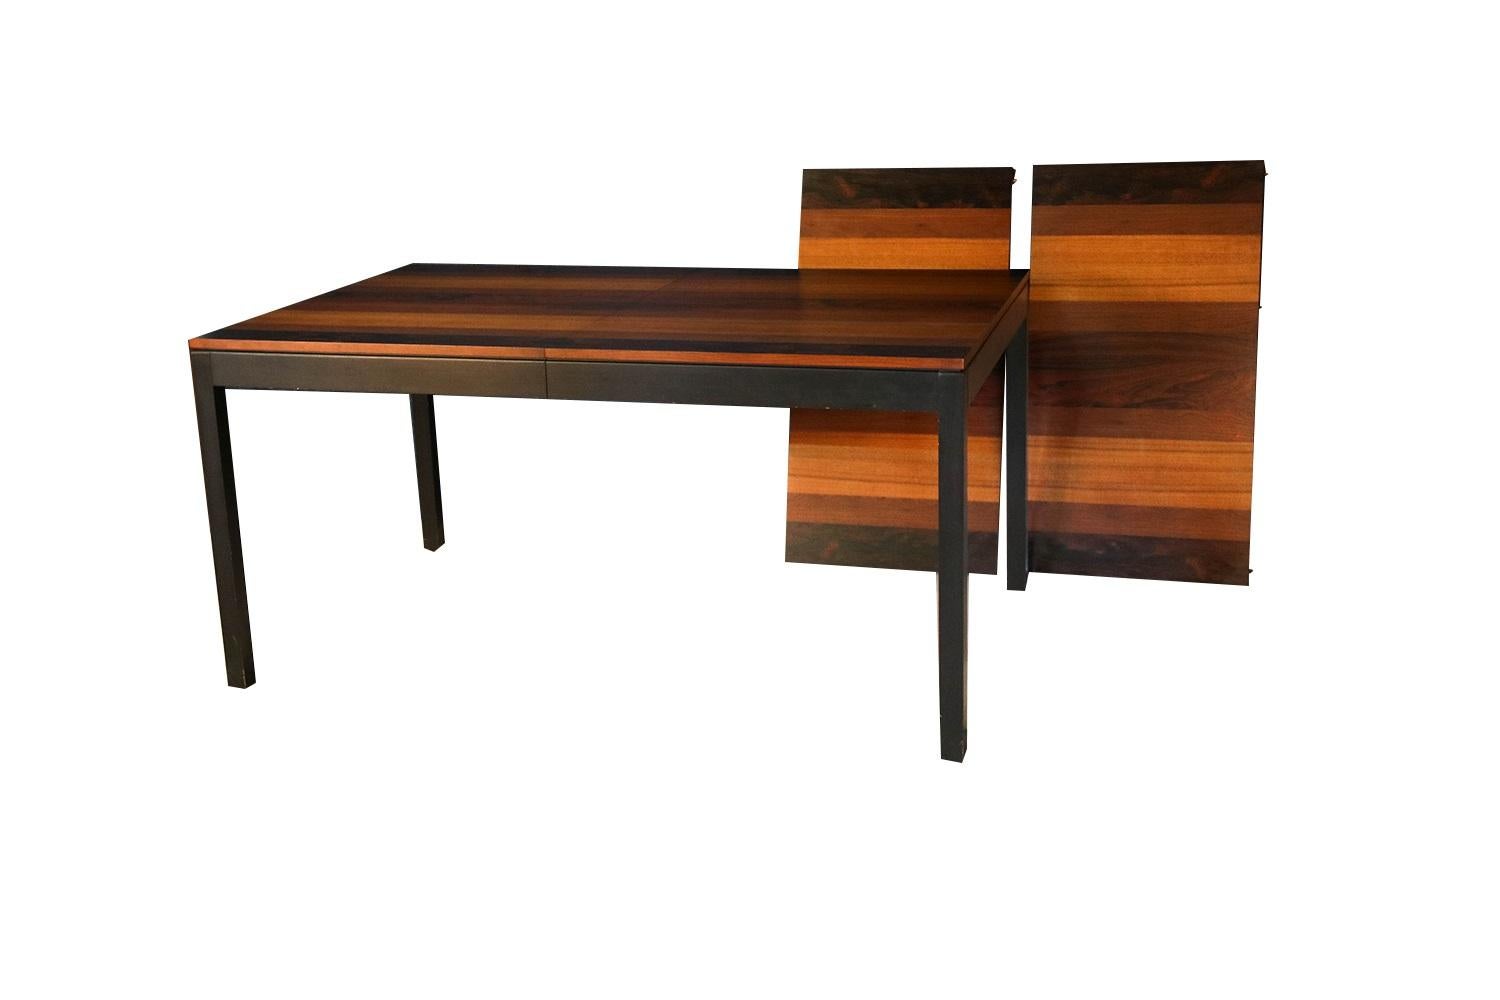 American Midcentury Expandable Milo Baughman Dining Table for Directional For Sale